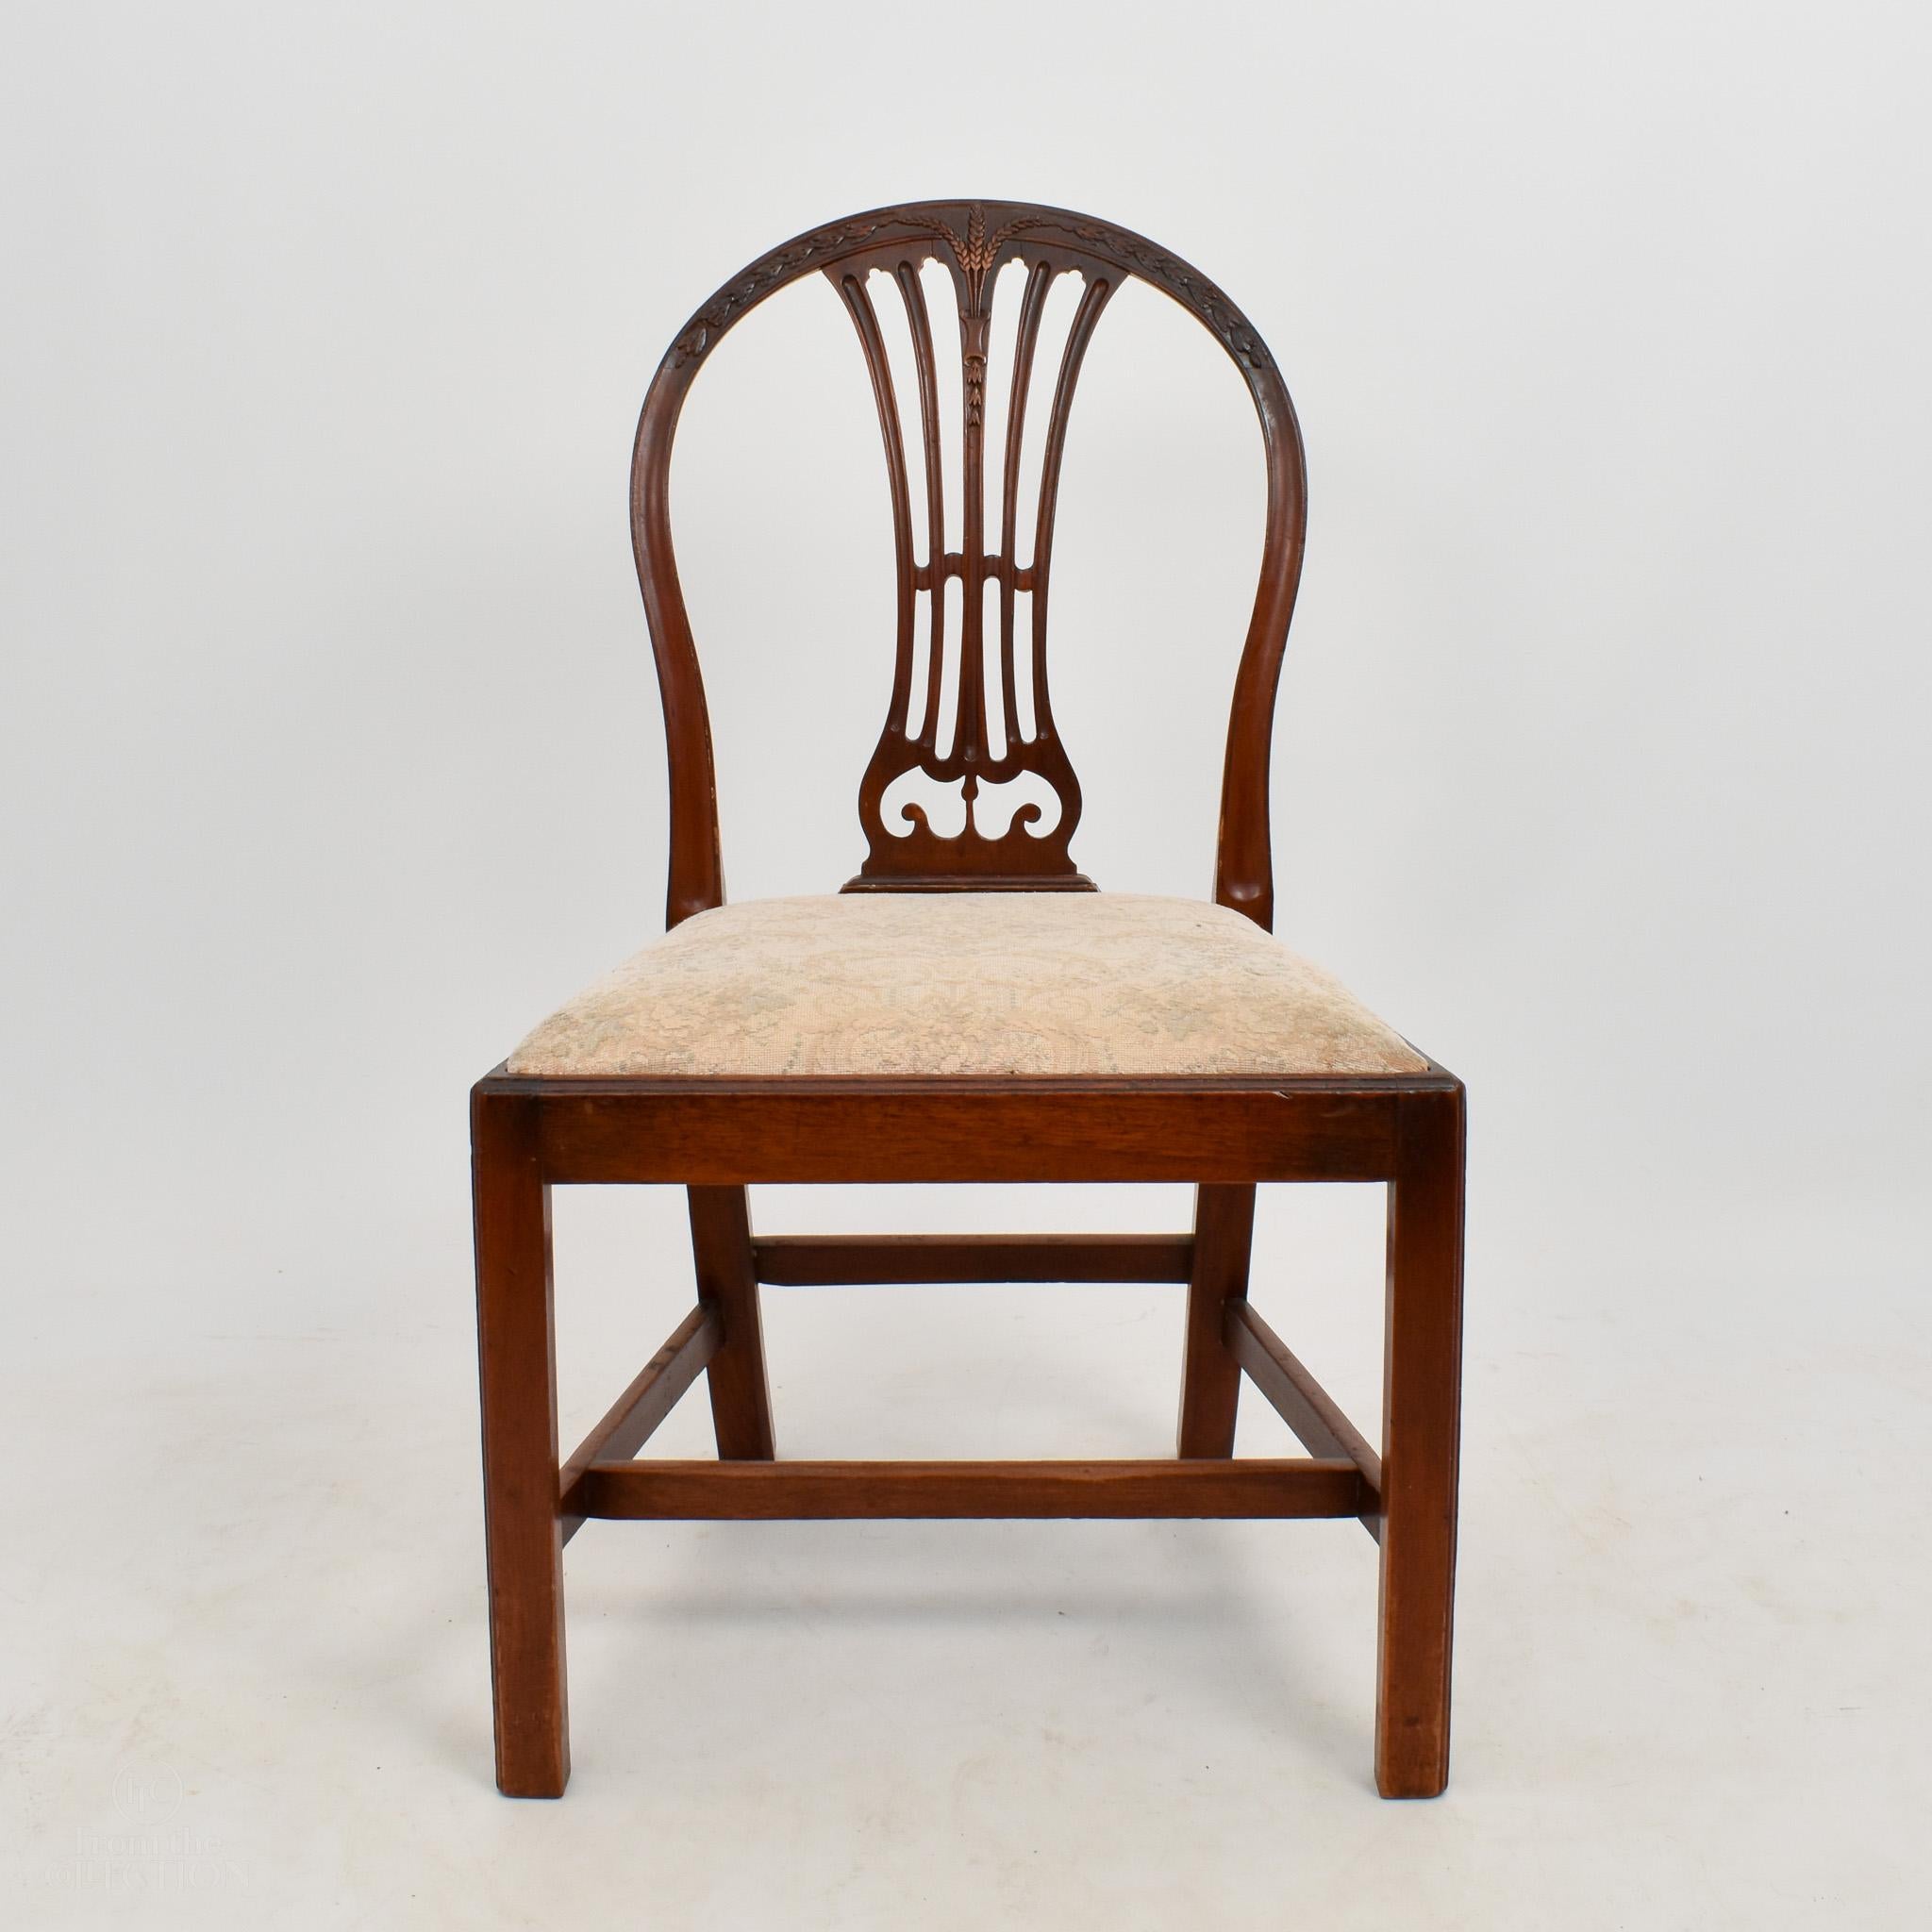 Set of 6 mahogany Hepplewhite dining chairs with wheat carving to the backs. The wood is beautifully rich and all of the chairs are in good condition. Some of the fabric on the seats could do with some upholstery, but we can arrange this before